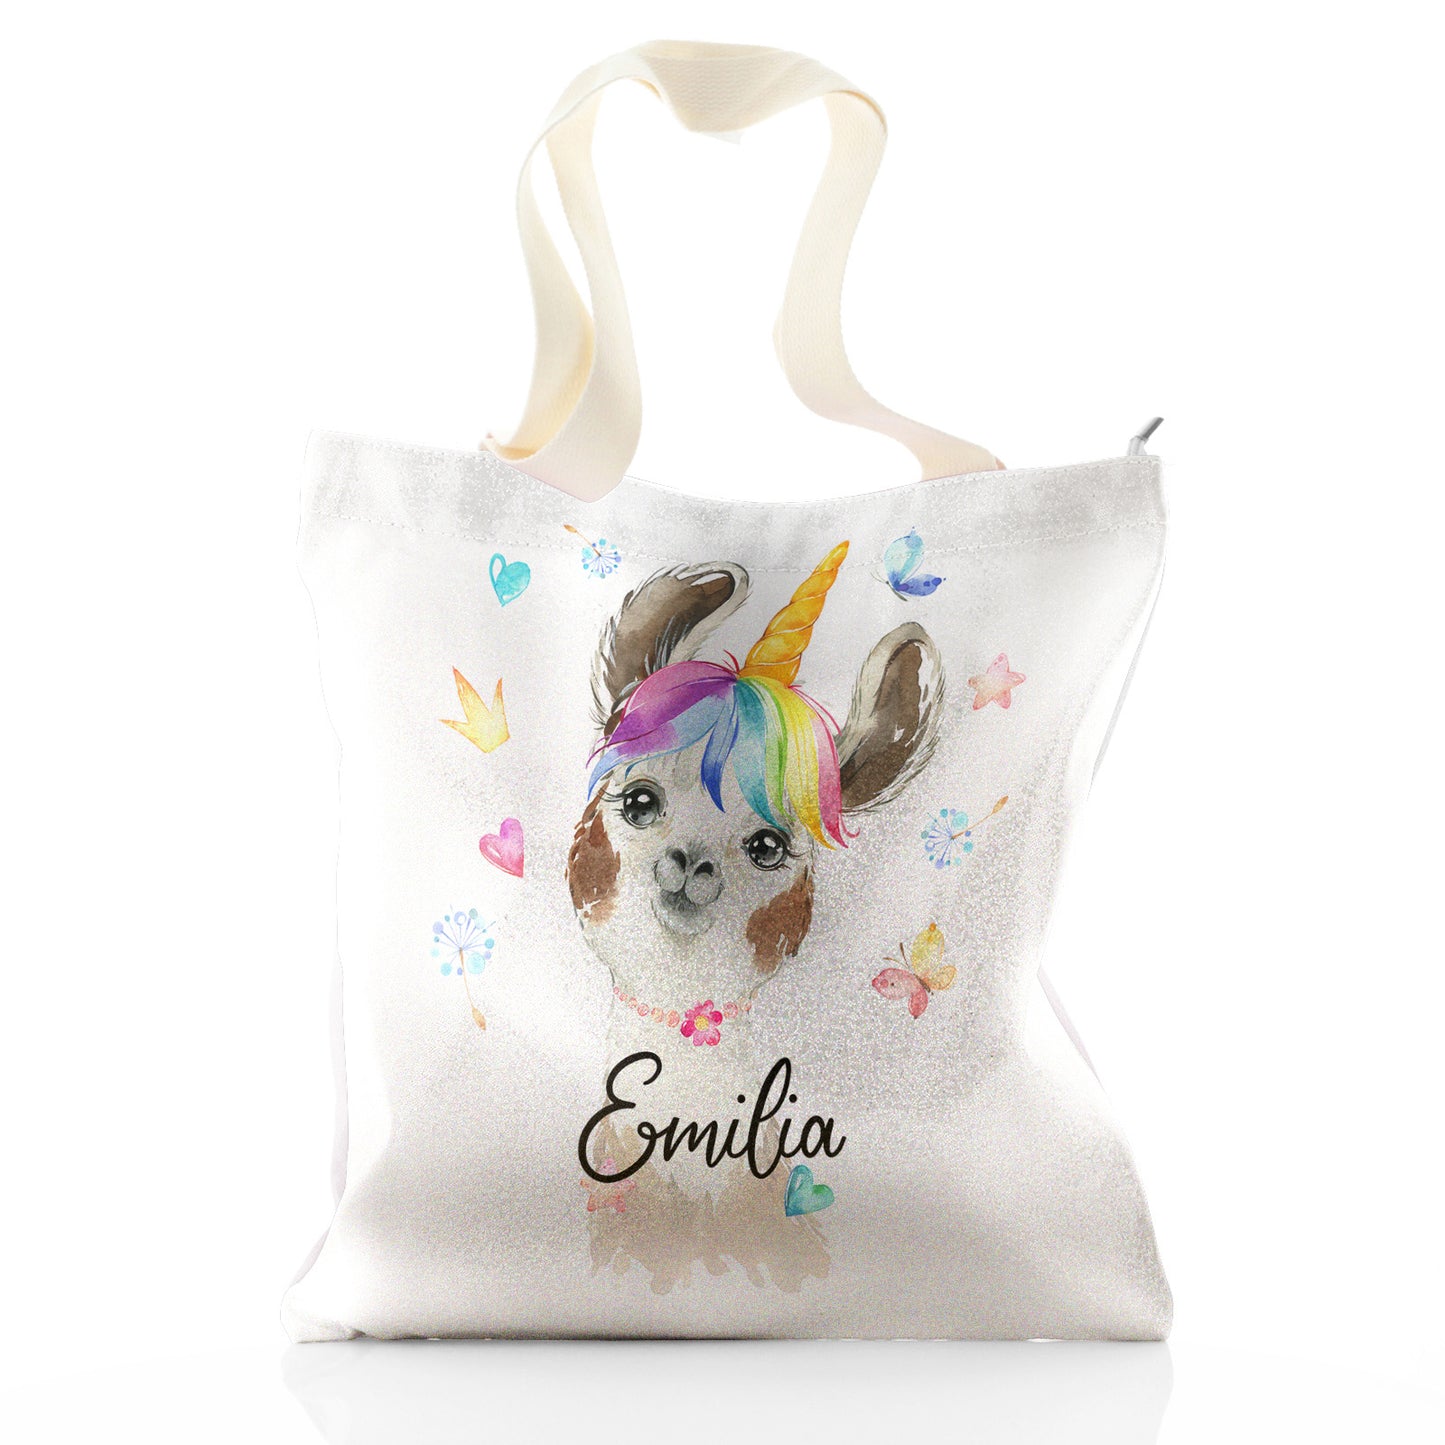 Personalised Glitter Tote Bag with Alpaca Unicorn with Rainbow Hair Hearts Stars and Cute Text